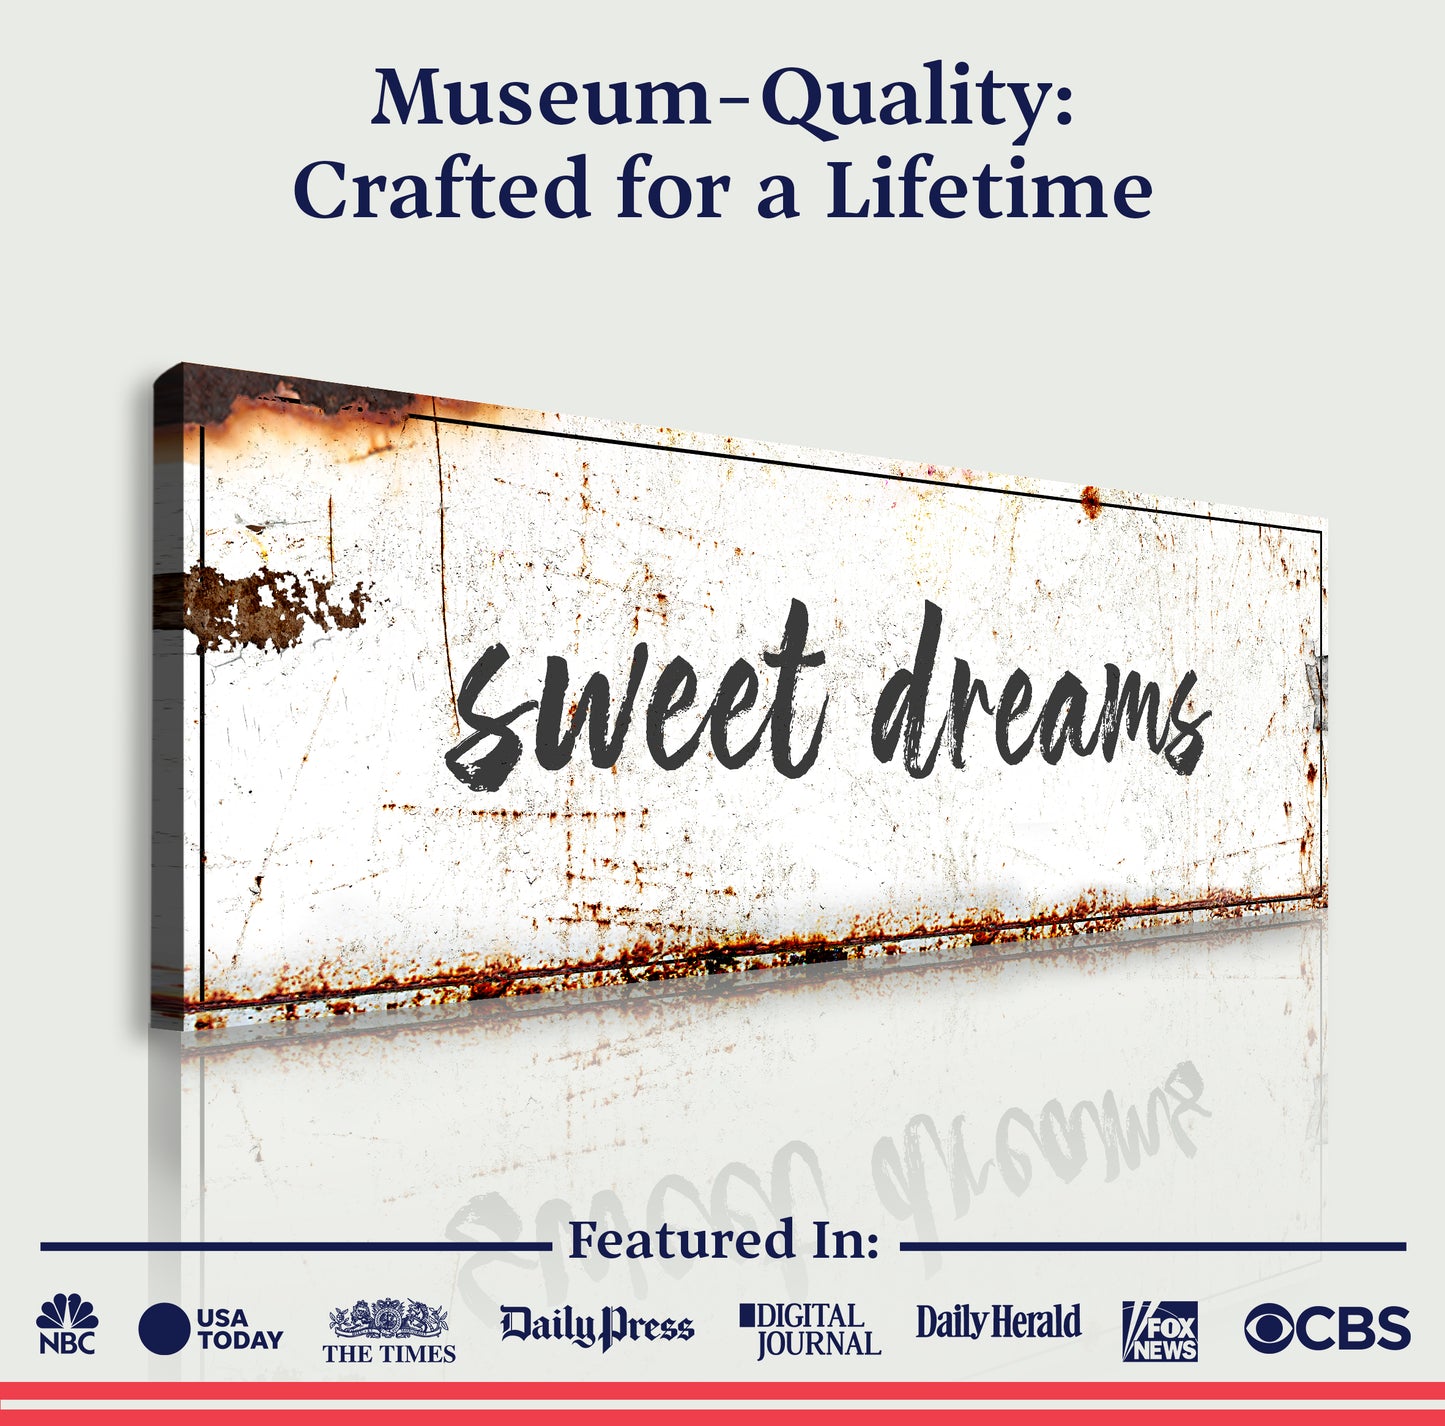 Sweet Dreams Sign (Free Shipping)